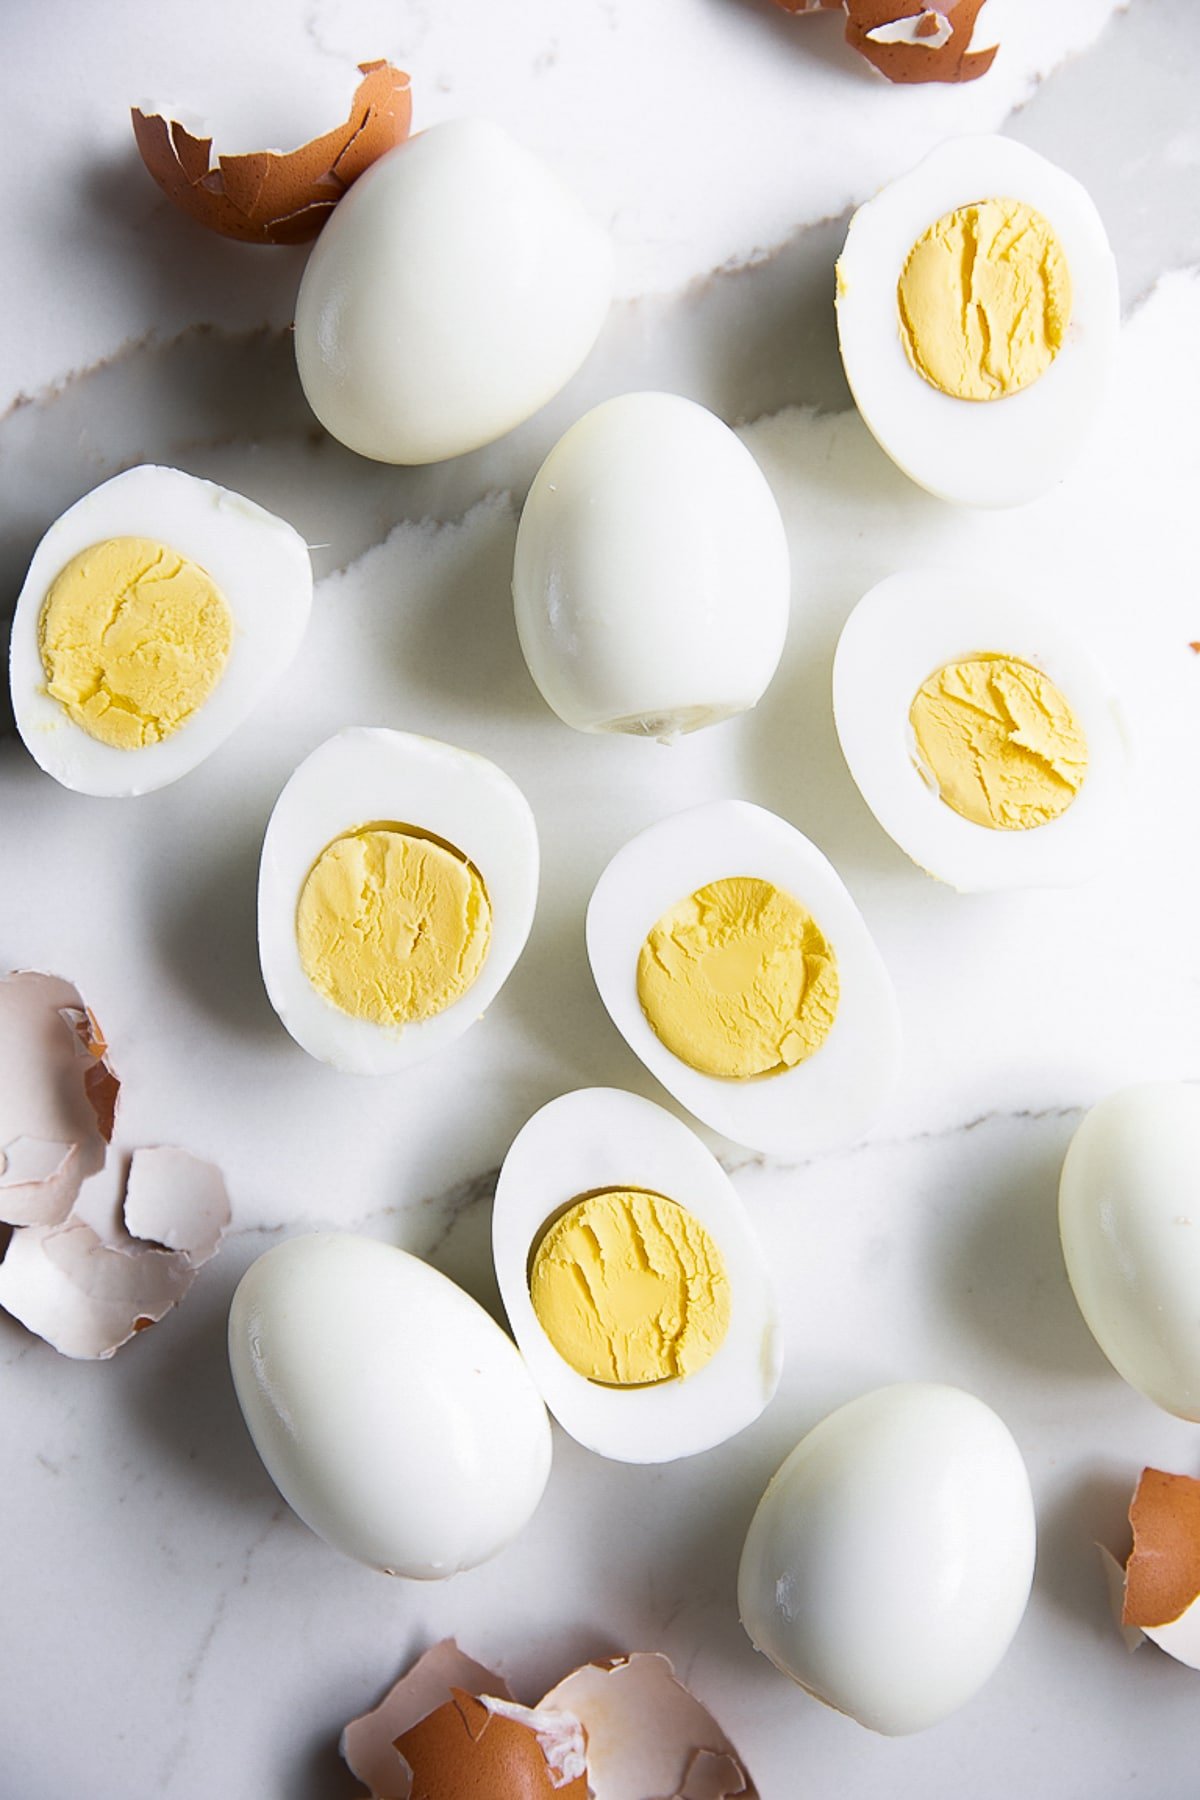 Perfect peeled hard boiled eggs, half have beef sliced in half lengthwise with a creamy yellow yolk.